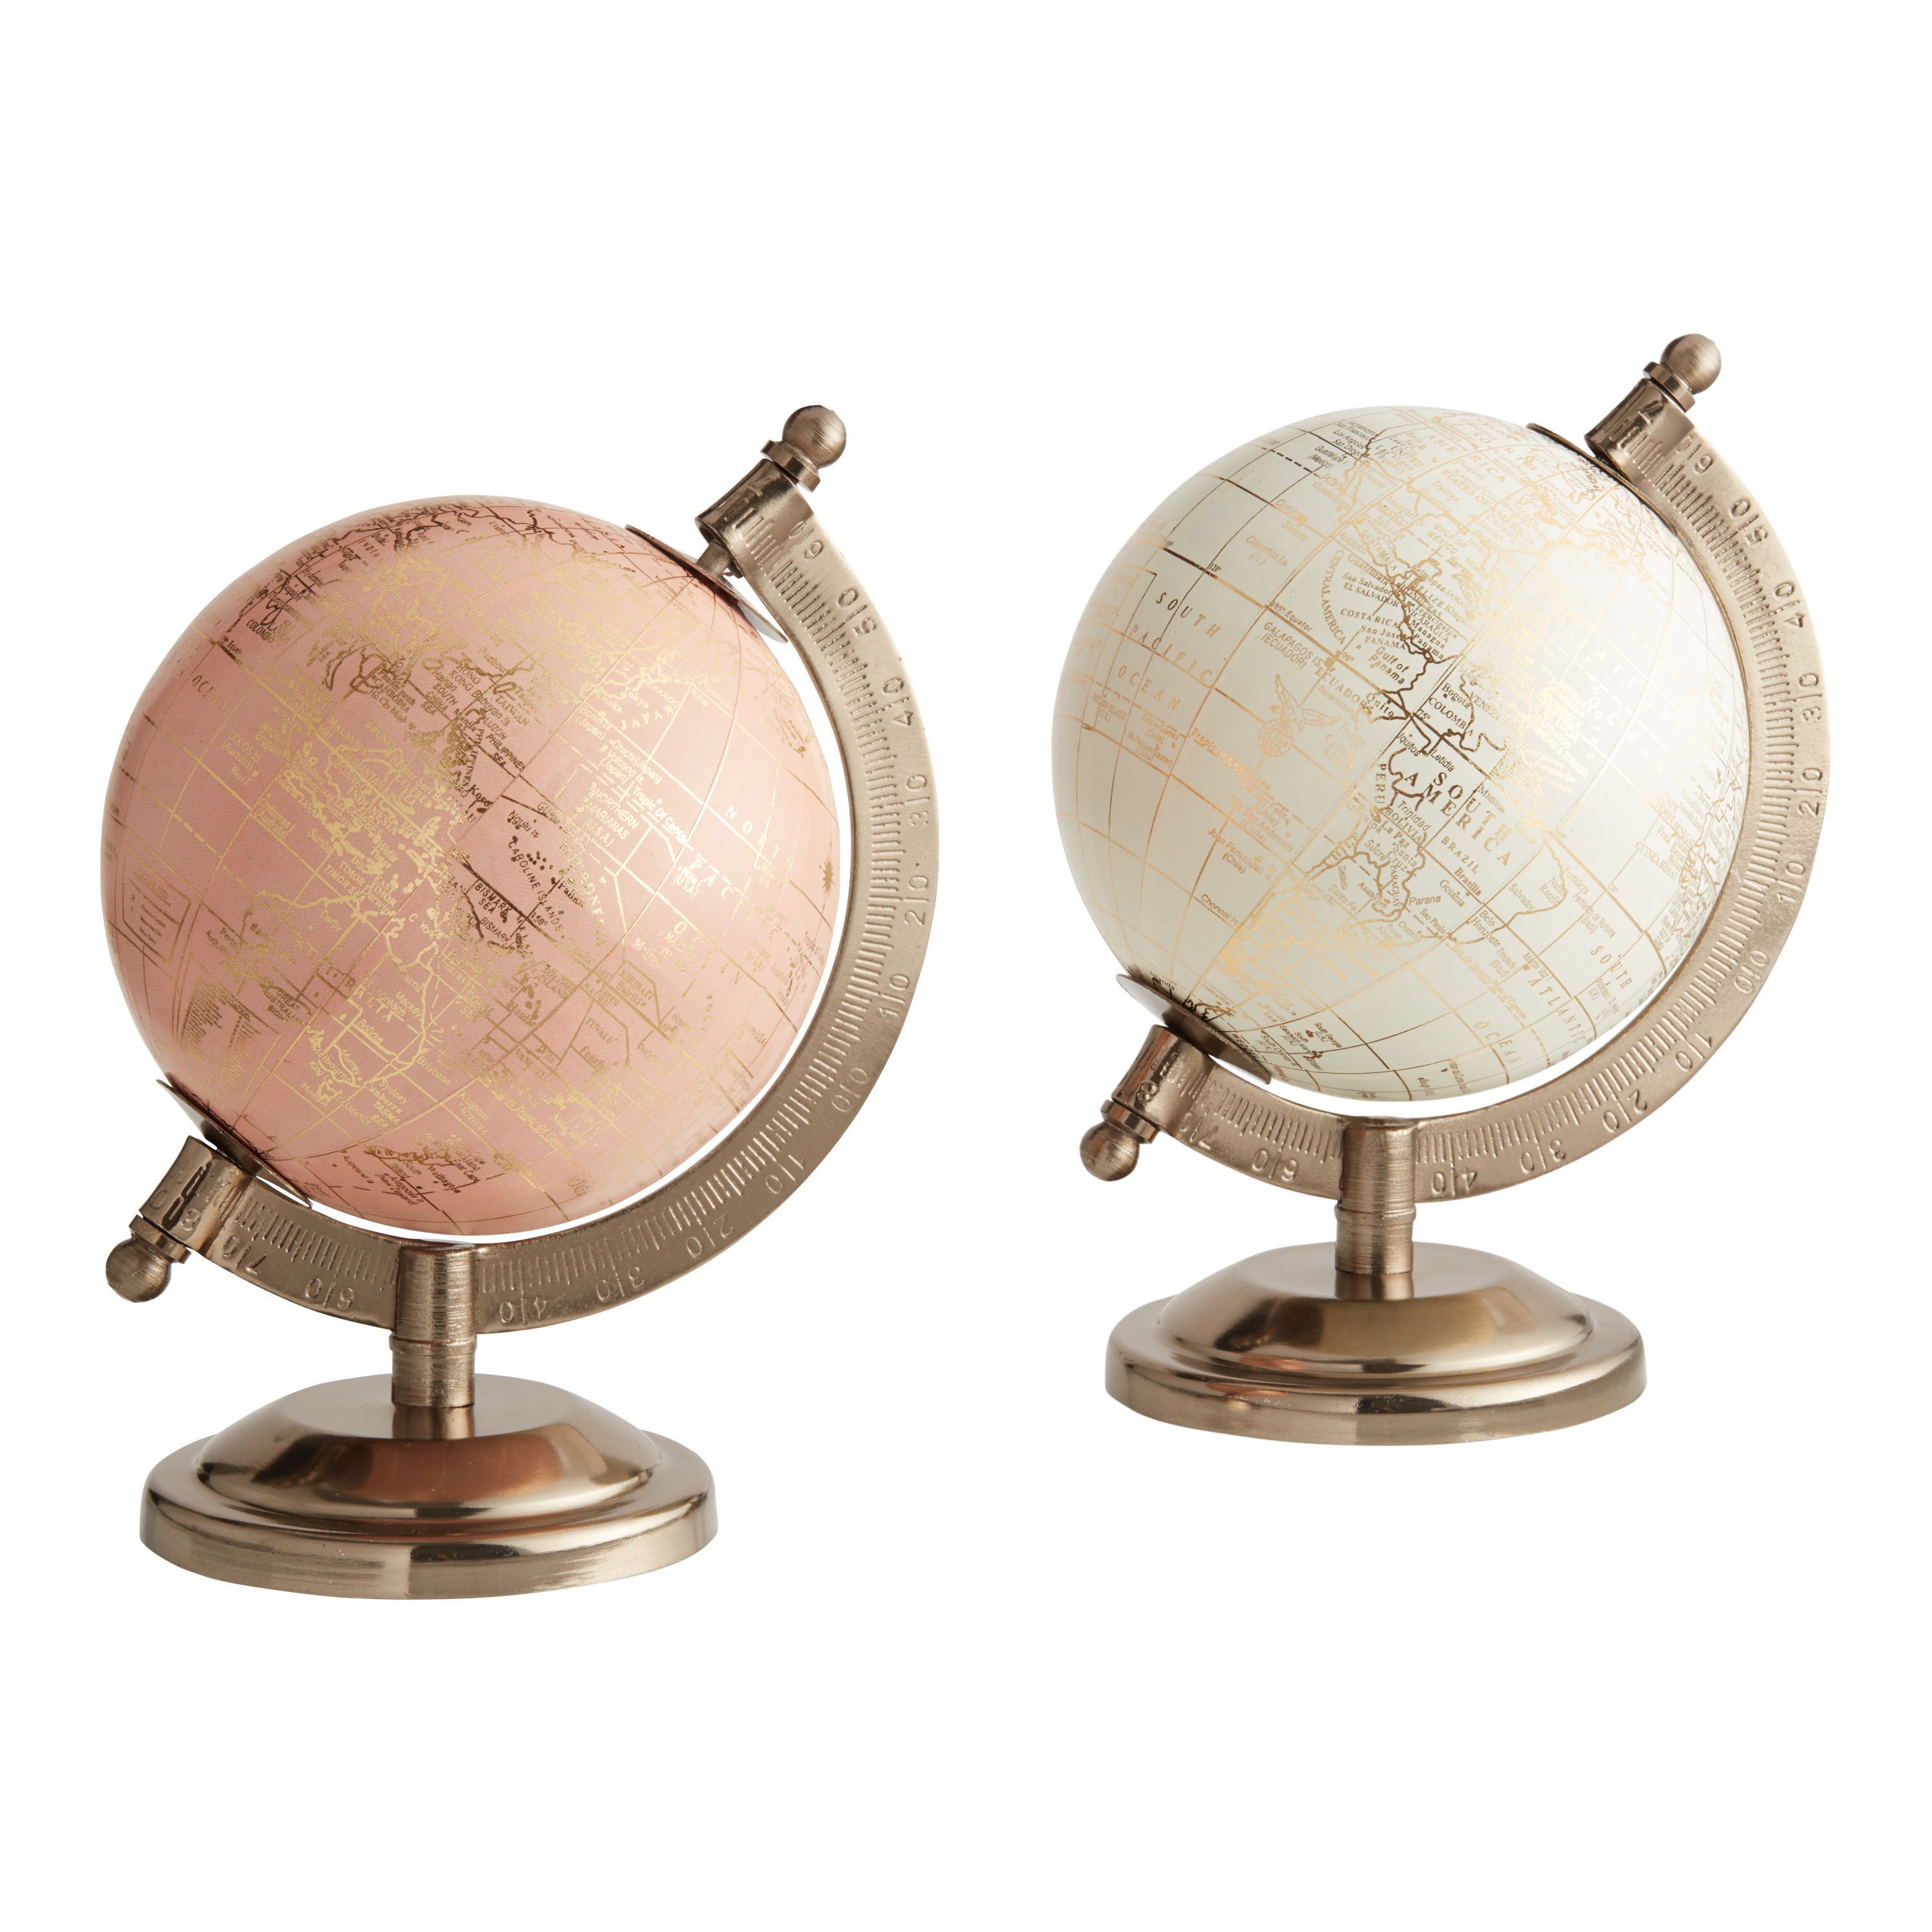 Mini Ivory And Blush Globes With Brass Stands Set Of 2 | World Market